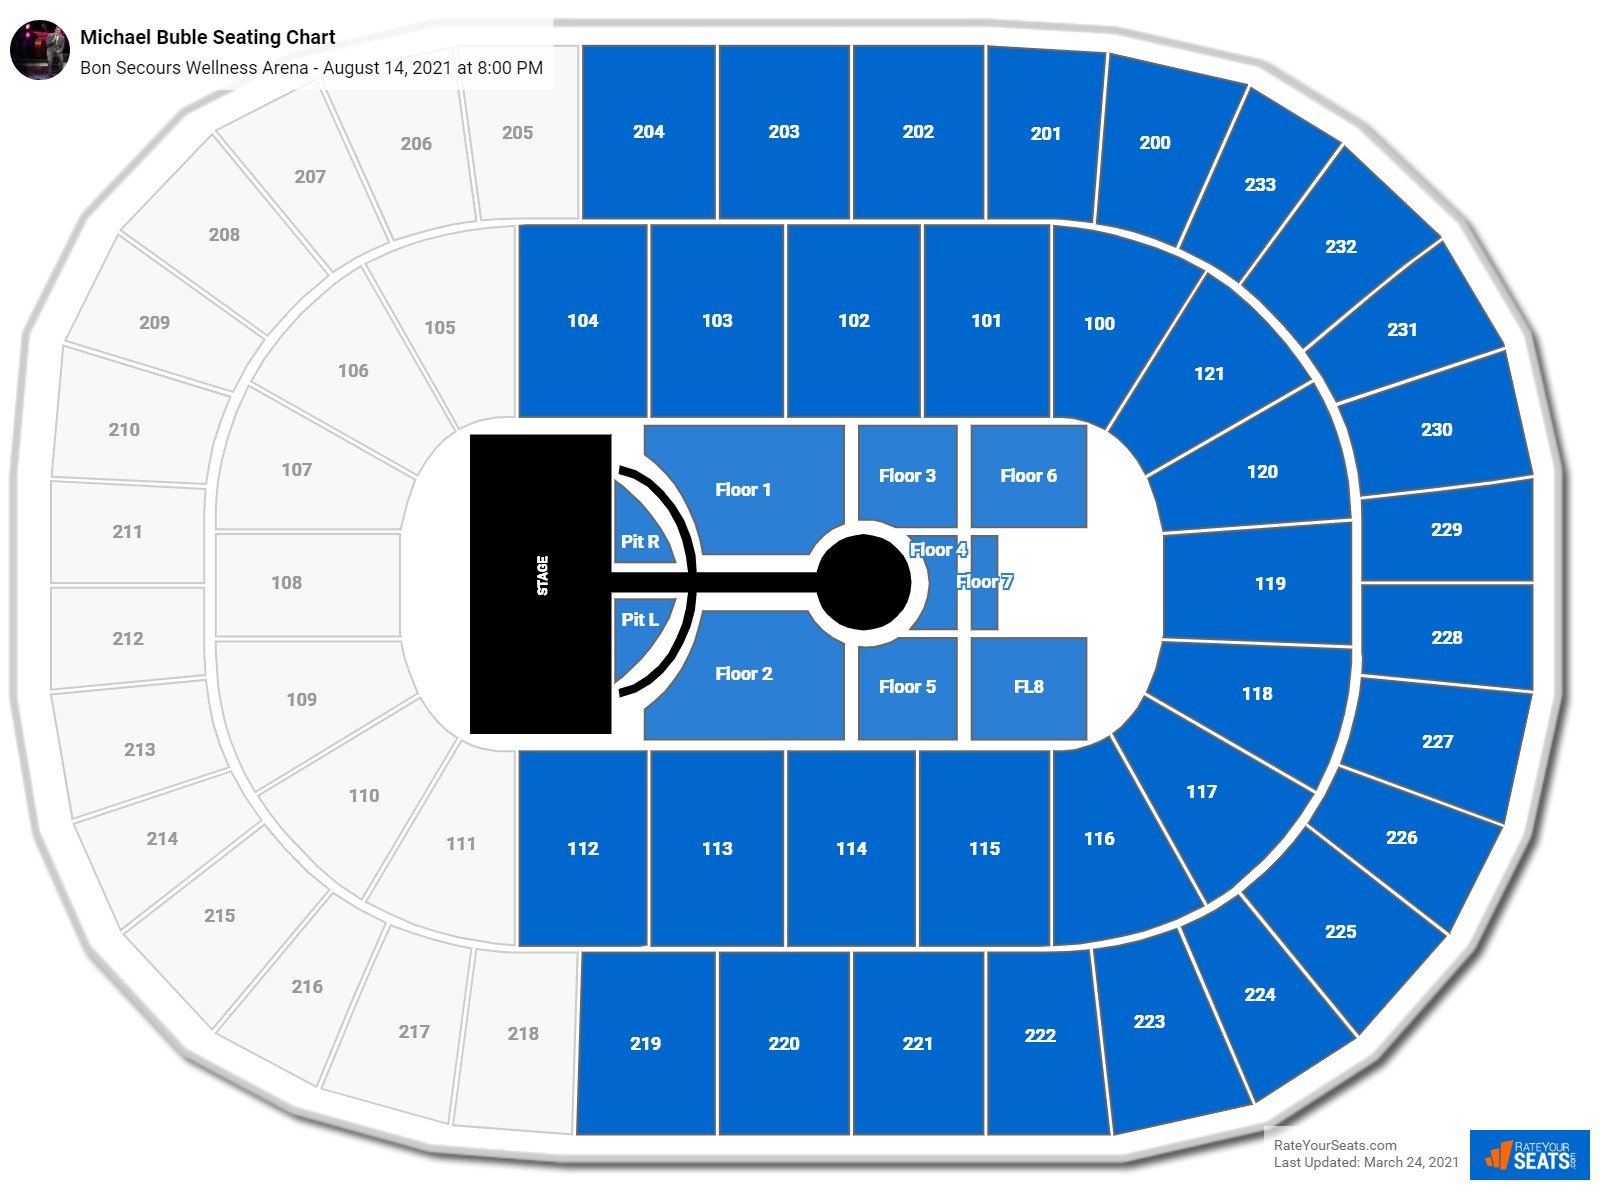 Bon Secours Wellness Arena Seating Charts for Concerts